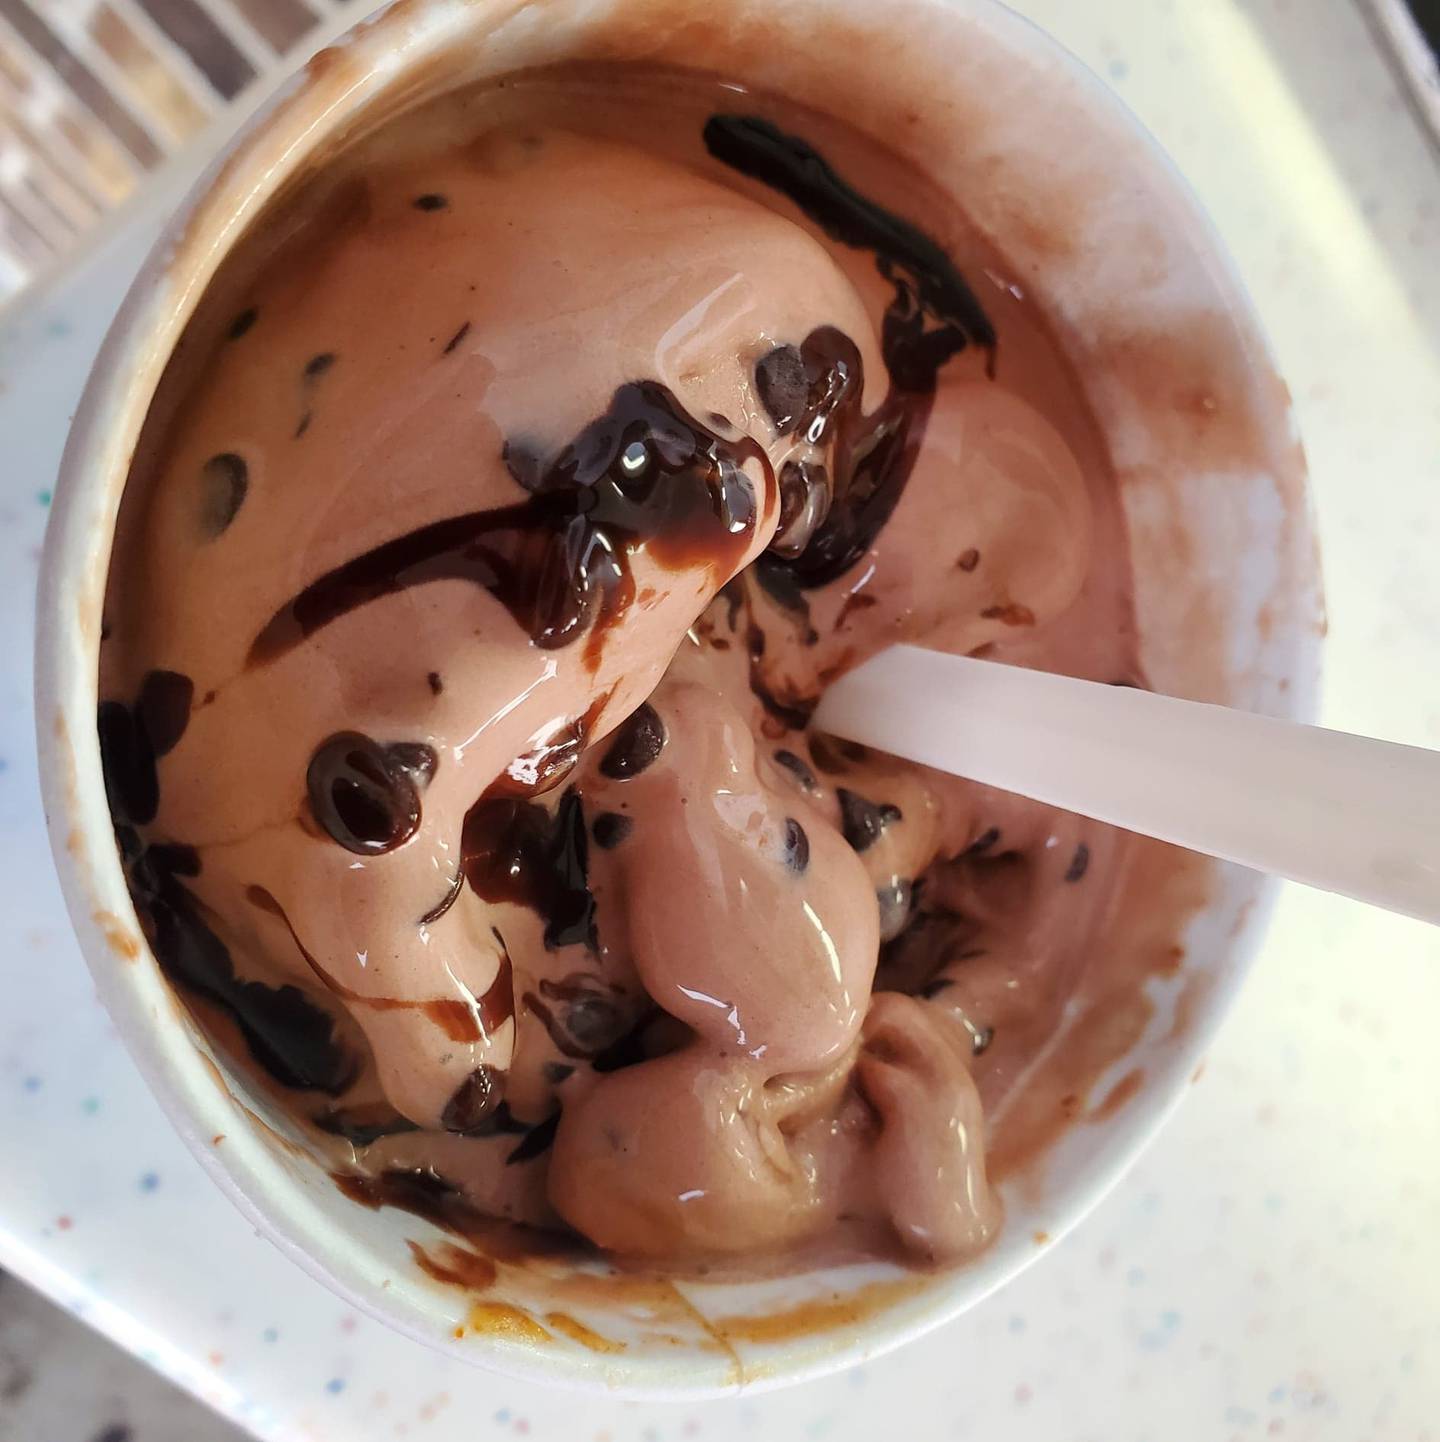 The “Death by Chocolate” speciality tornado at the Minooka Creamery came with chocolate ice cream, mini chocolate chips and chocolate syrup.